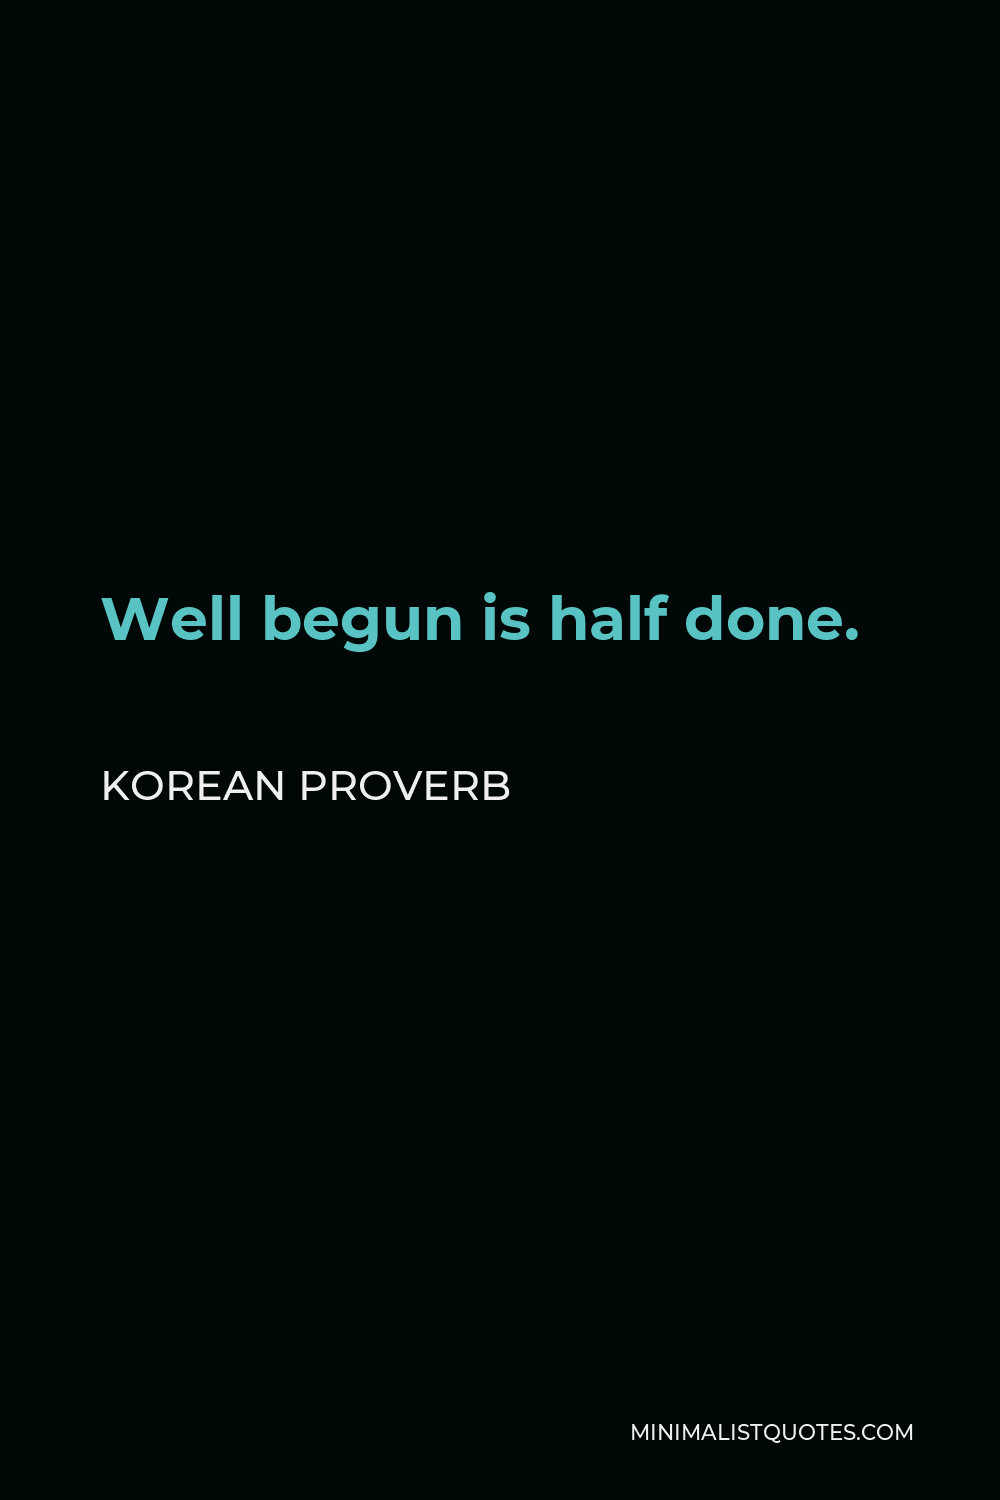 Korean Proverb Quote - Well begun is half done.